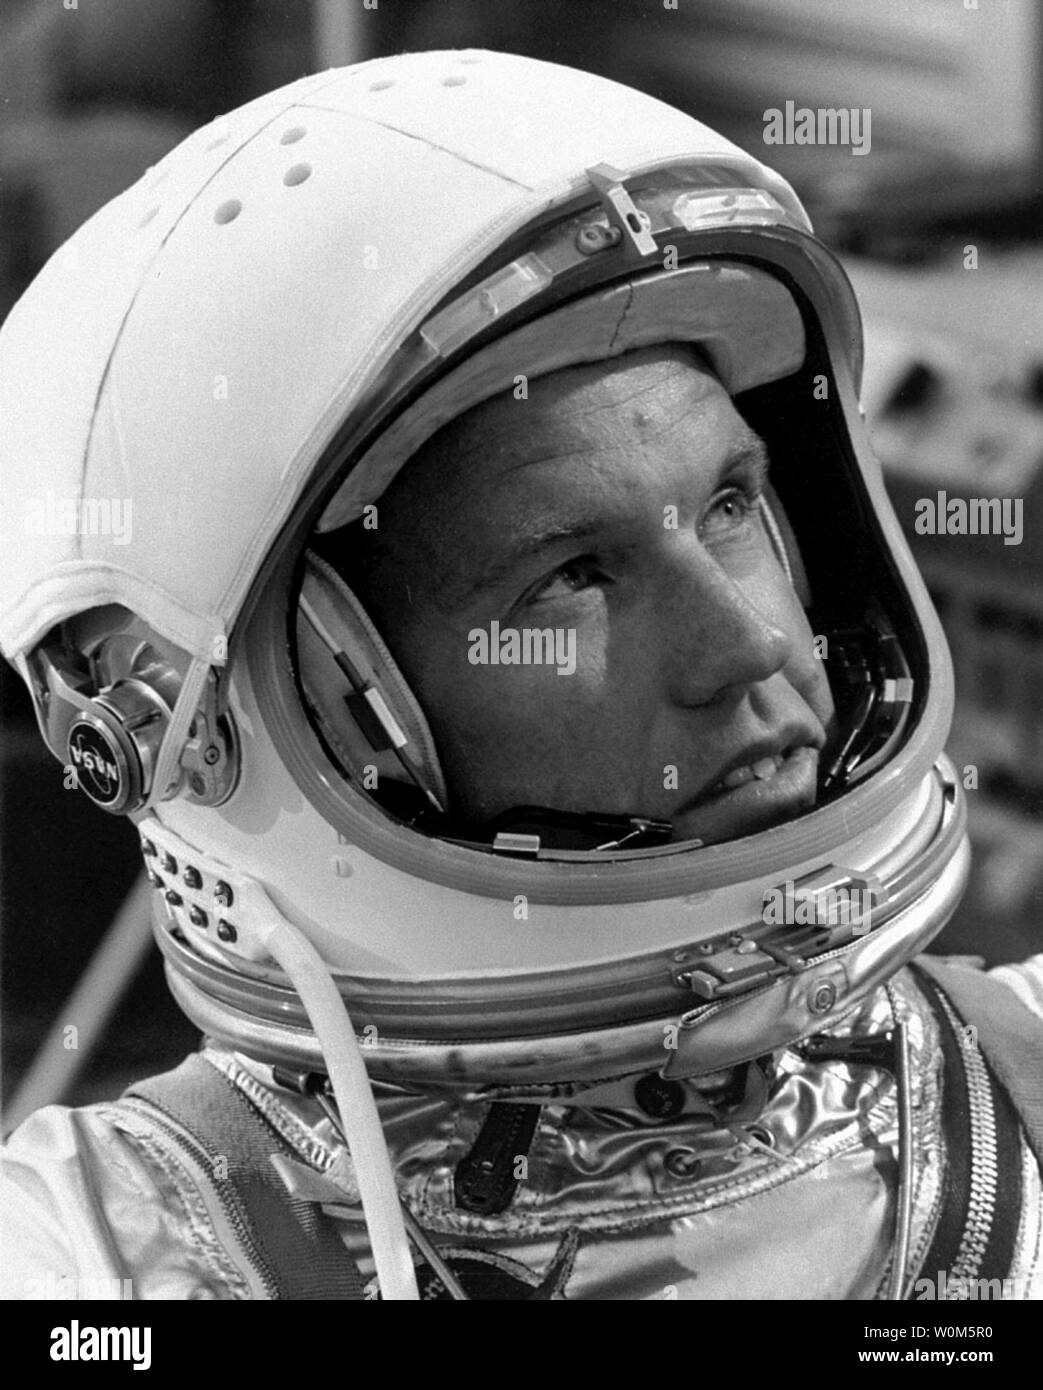 Gordon Cooper Jr., one of America's first seven astronauts, died on October 4, 2004 at his home in Ventura, Calif. He was 77 years old.  Cooper piloted the sixth and last flight of the Mercury program and later commanded Gemini 5.    (UPI Photo/NASA) Stock Photo